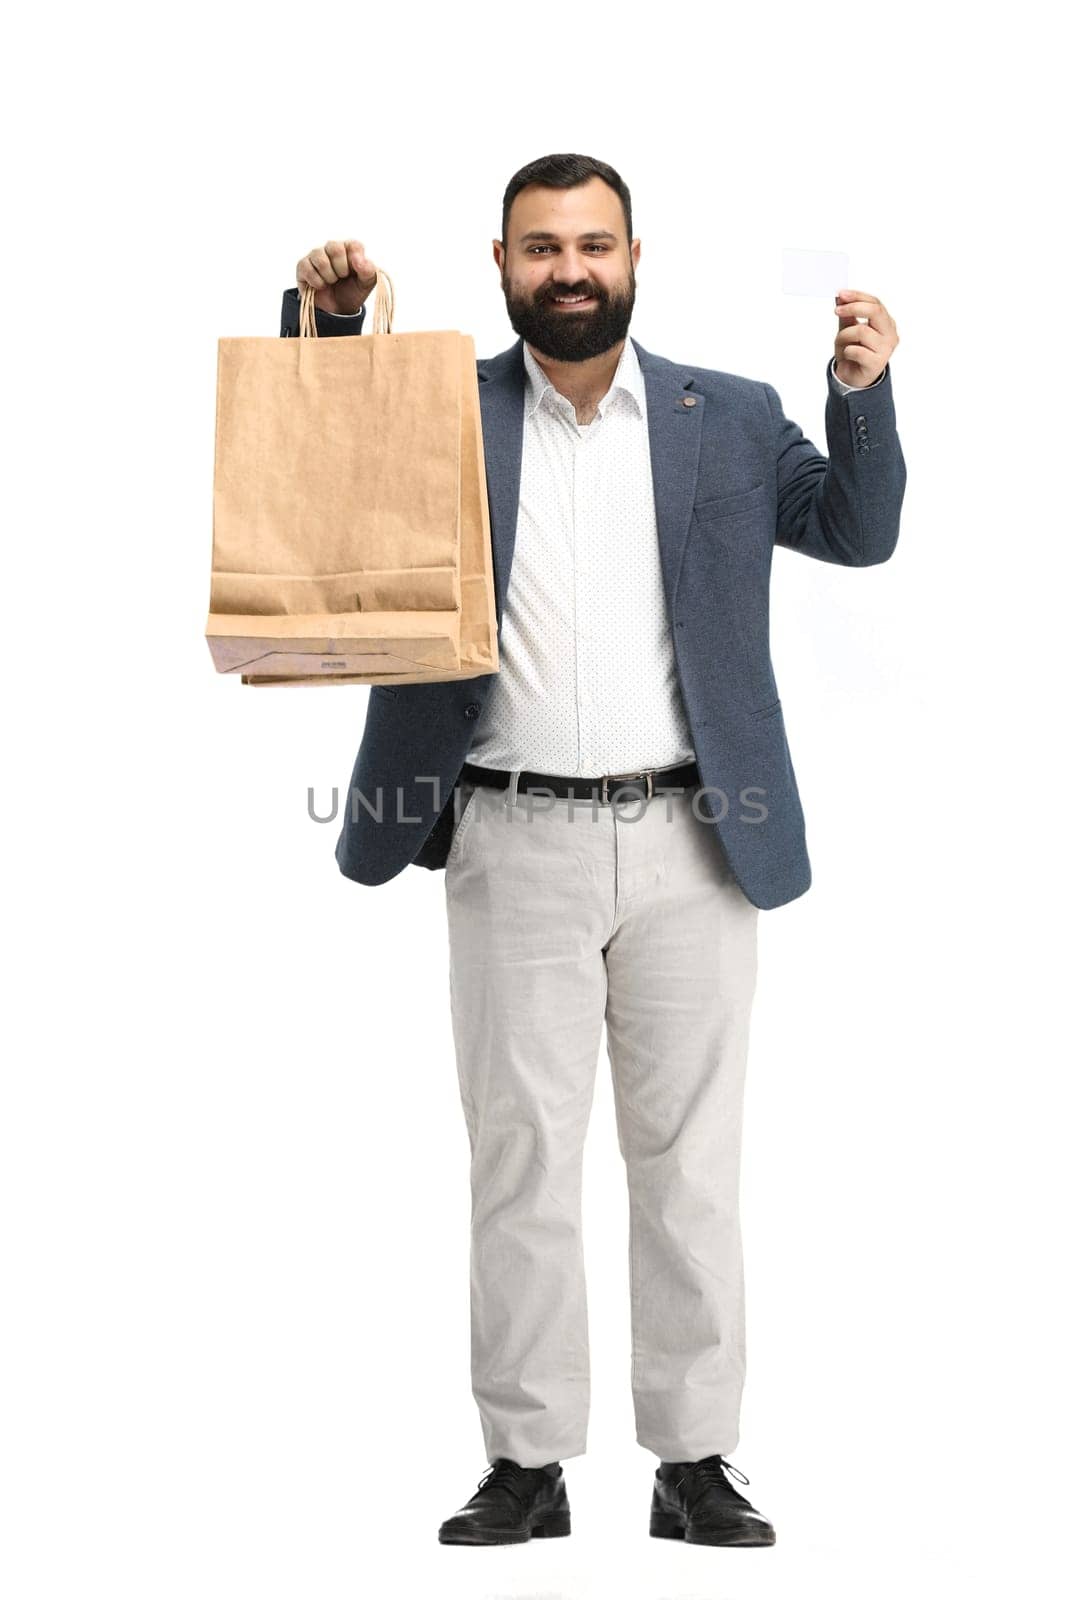 A man, full-length, on a white background, with packages and a card.